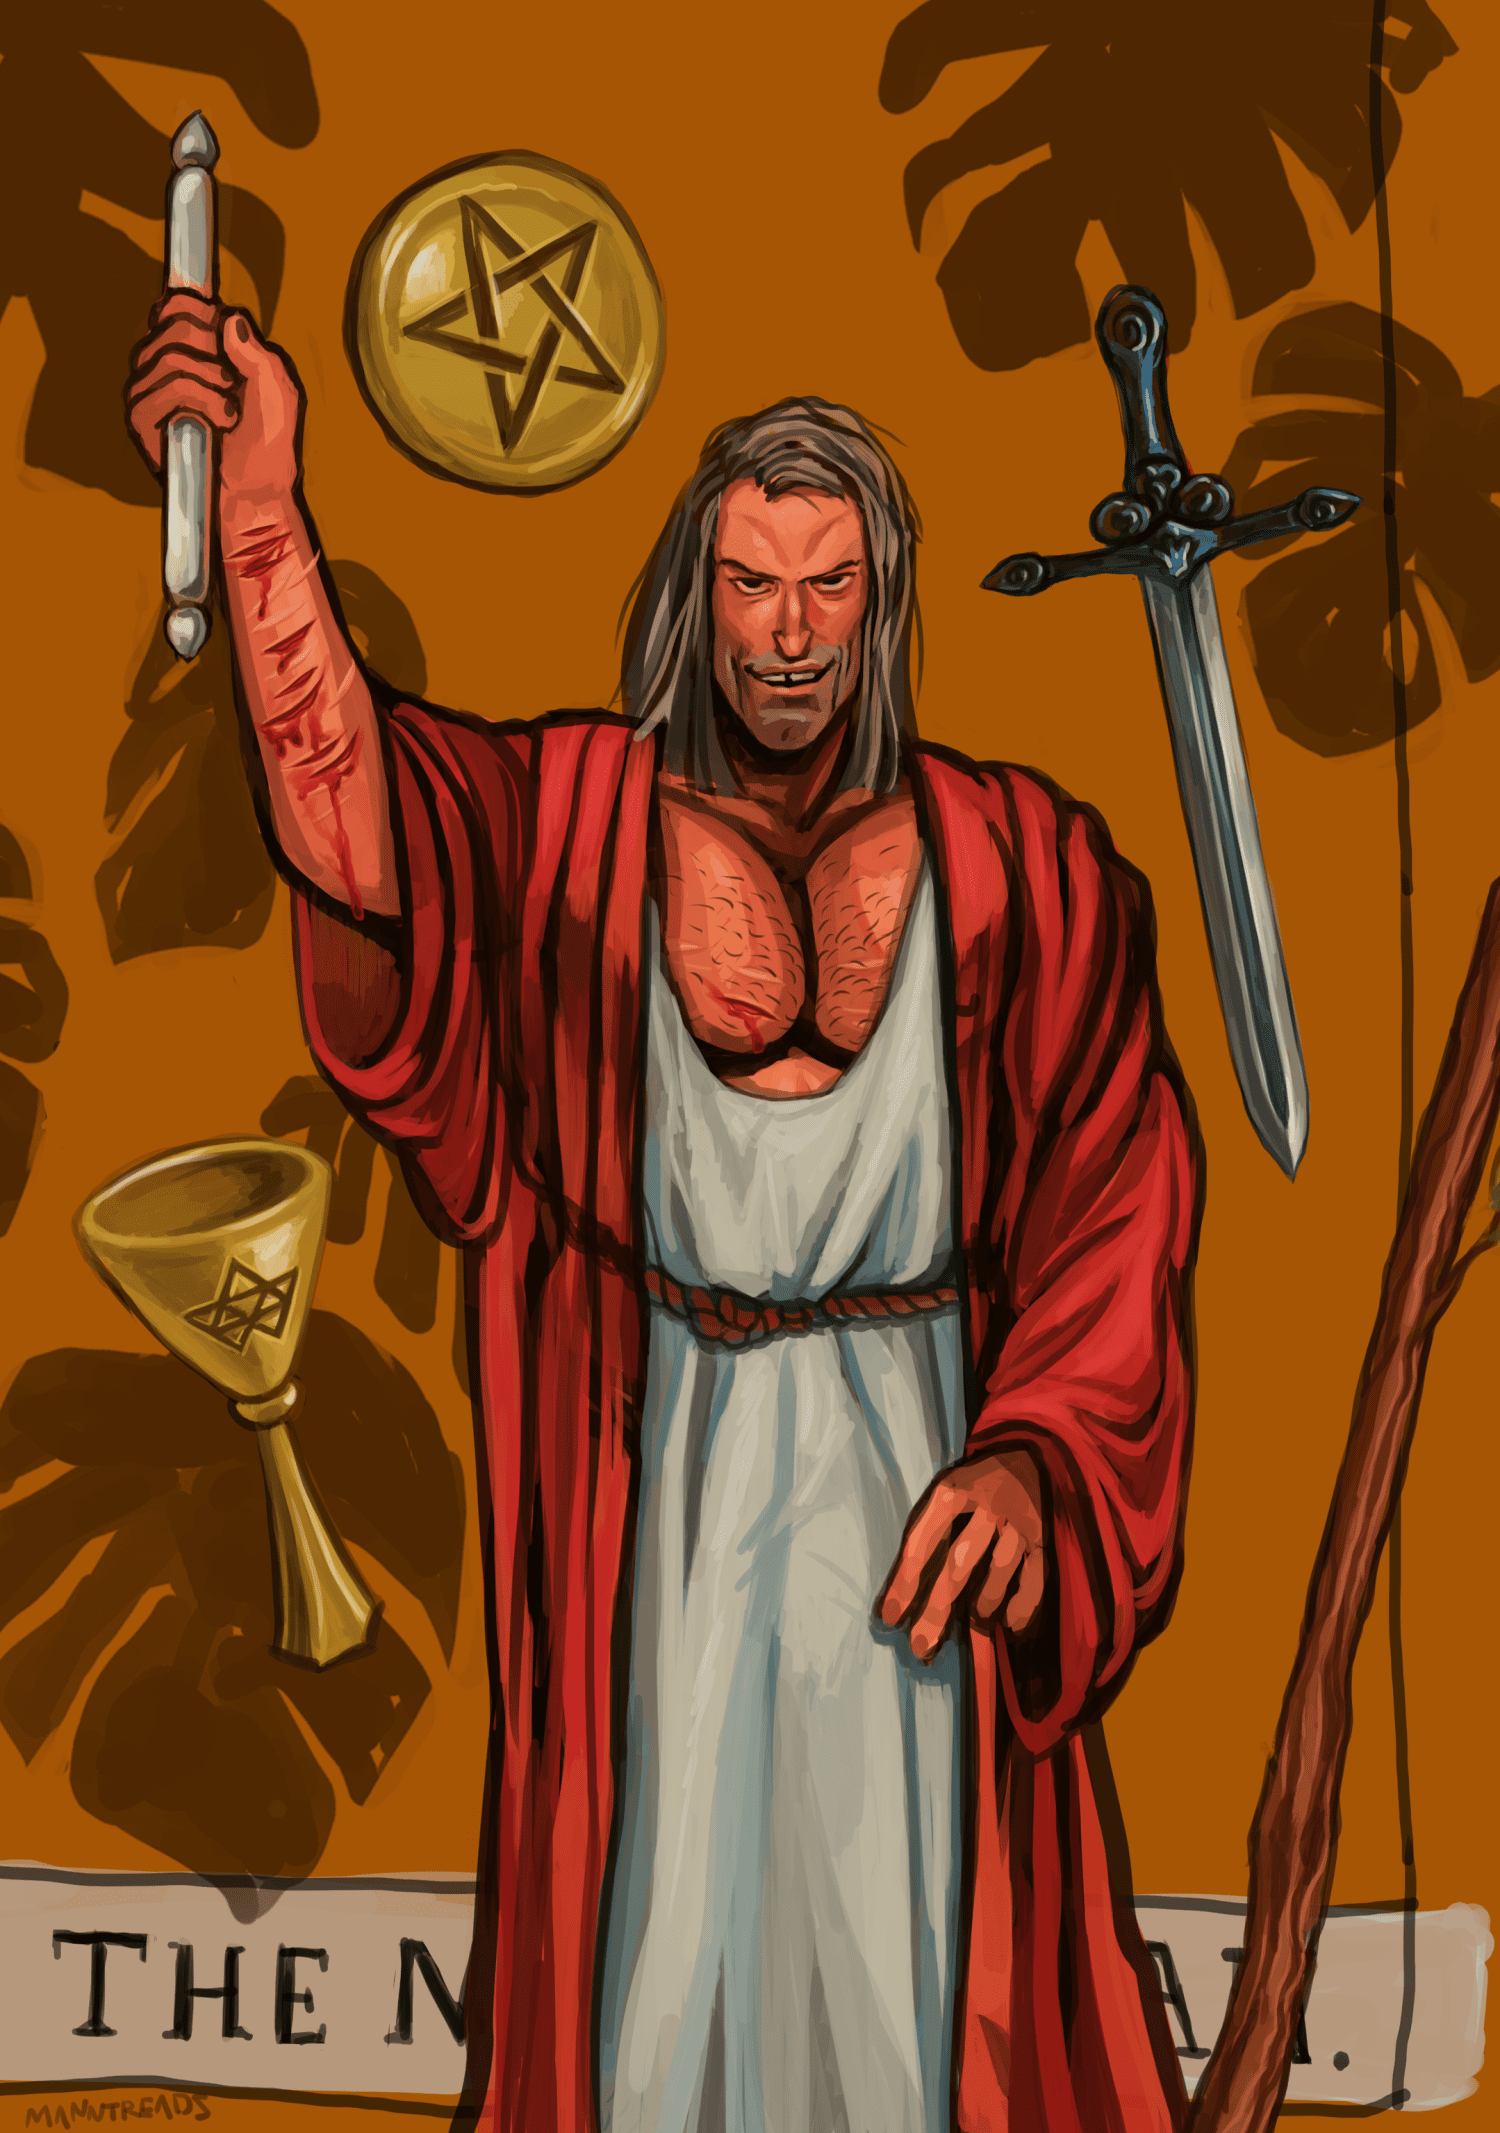 astral with bloody wrists holding a wand. he's standing in front of a banner that says the magician and a pentacle, cup, and sword float behind him.